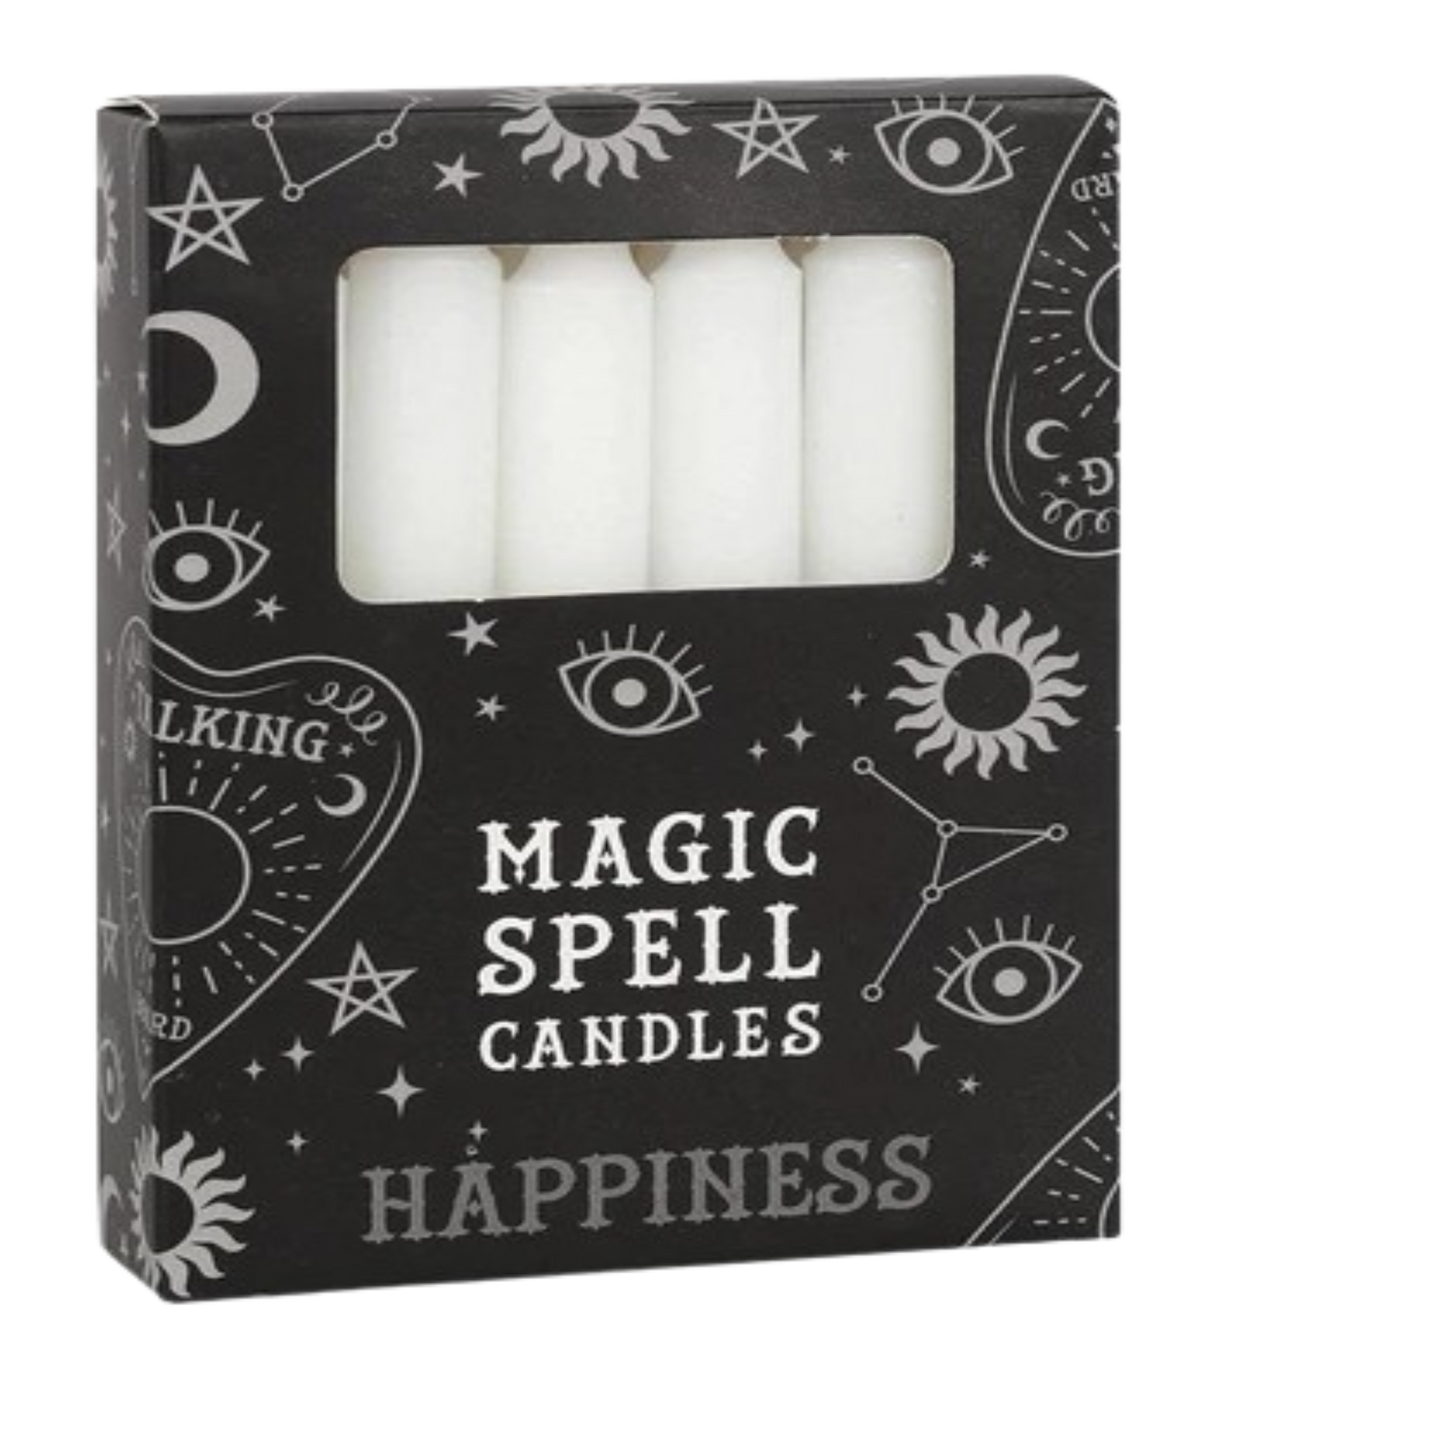 Spell Candles White